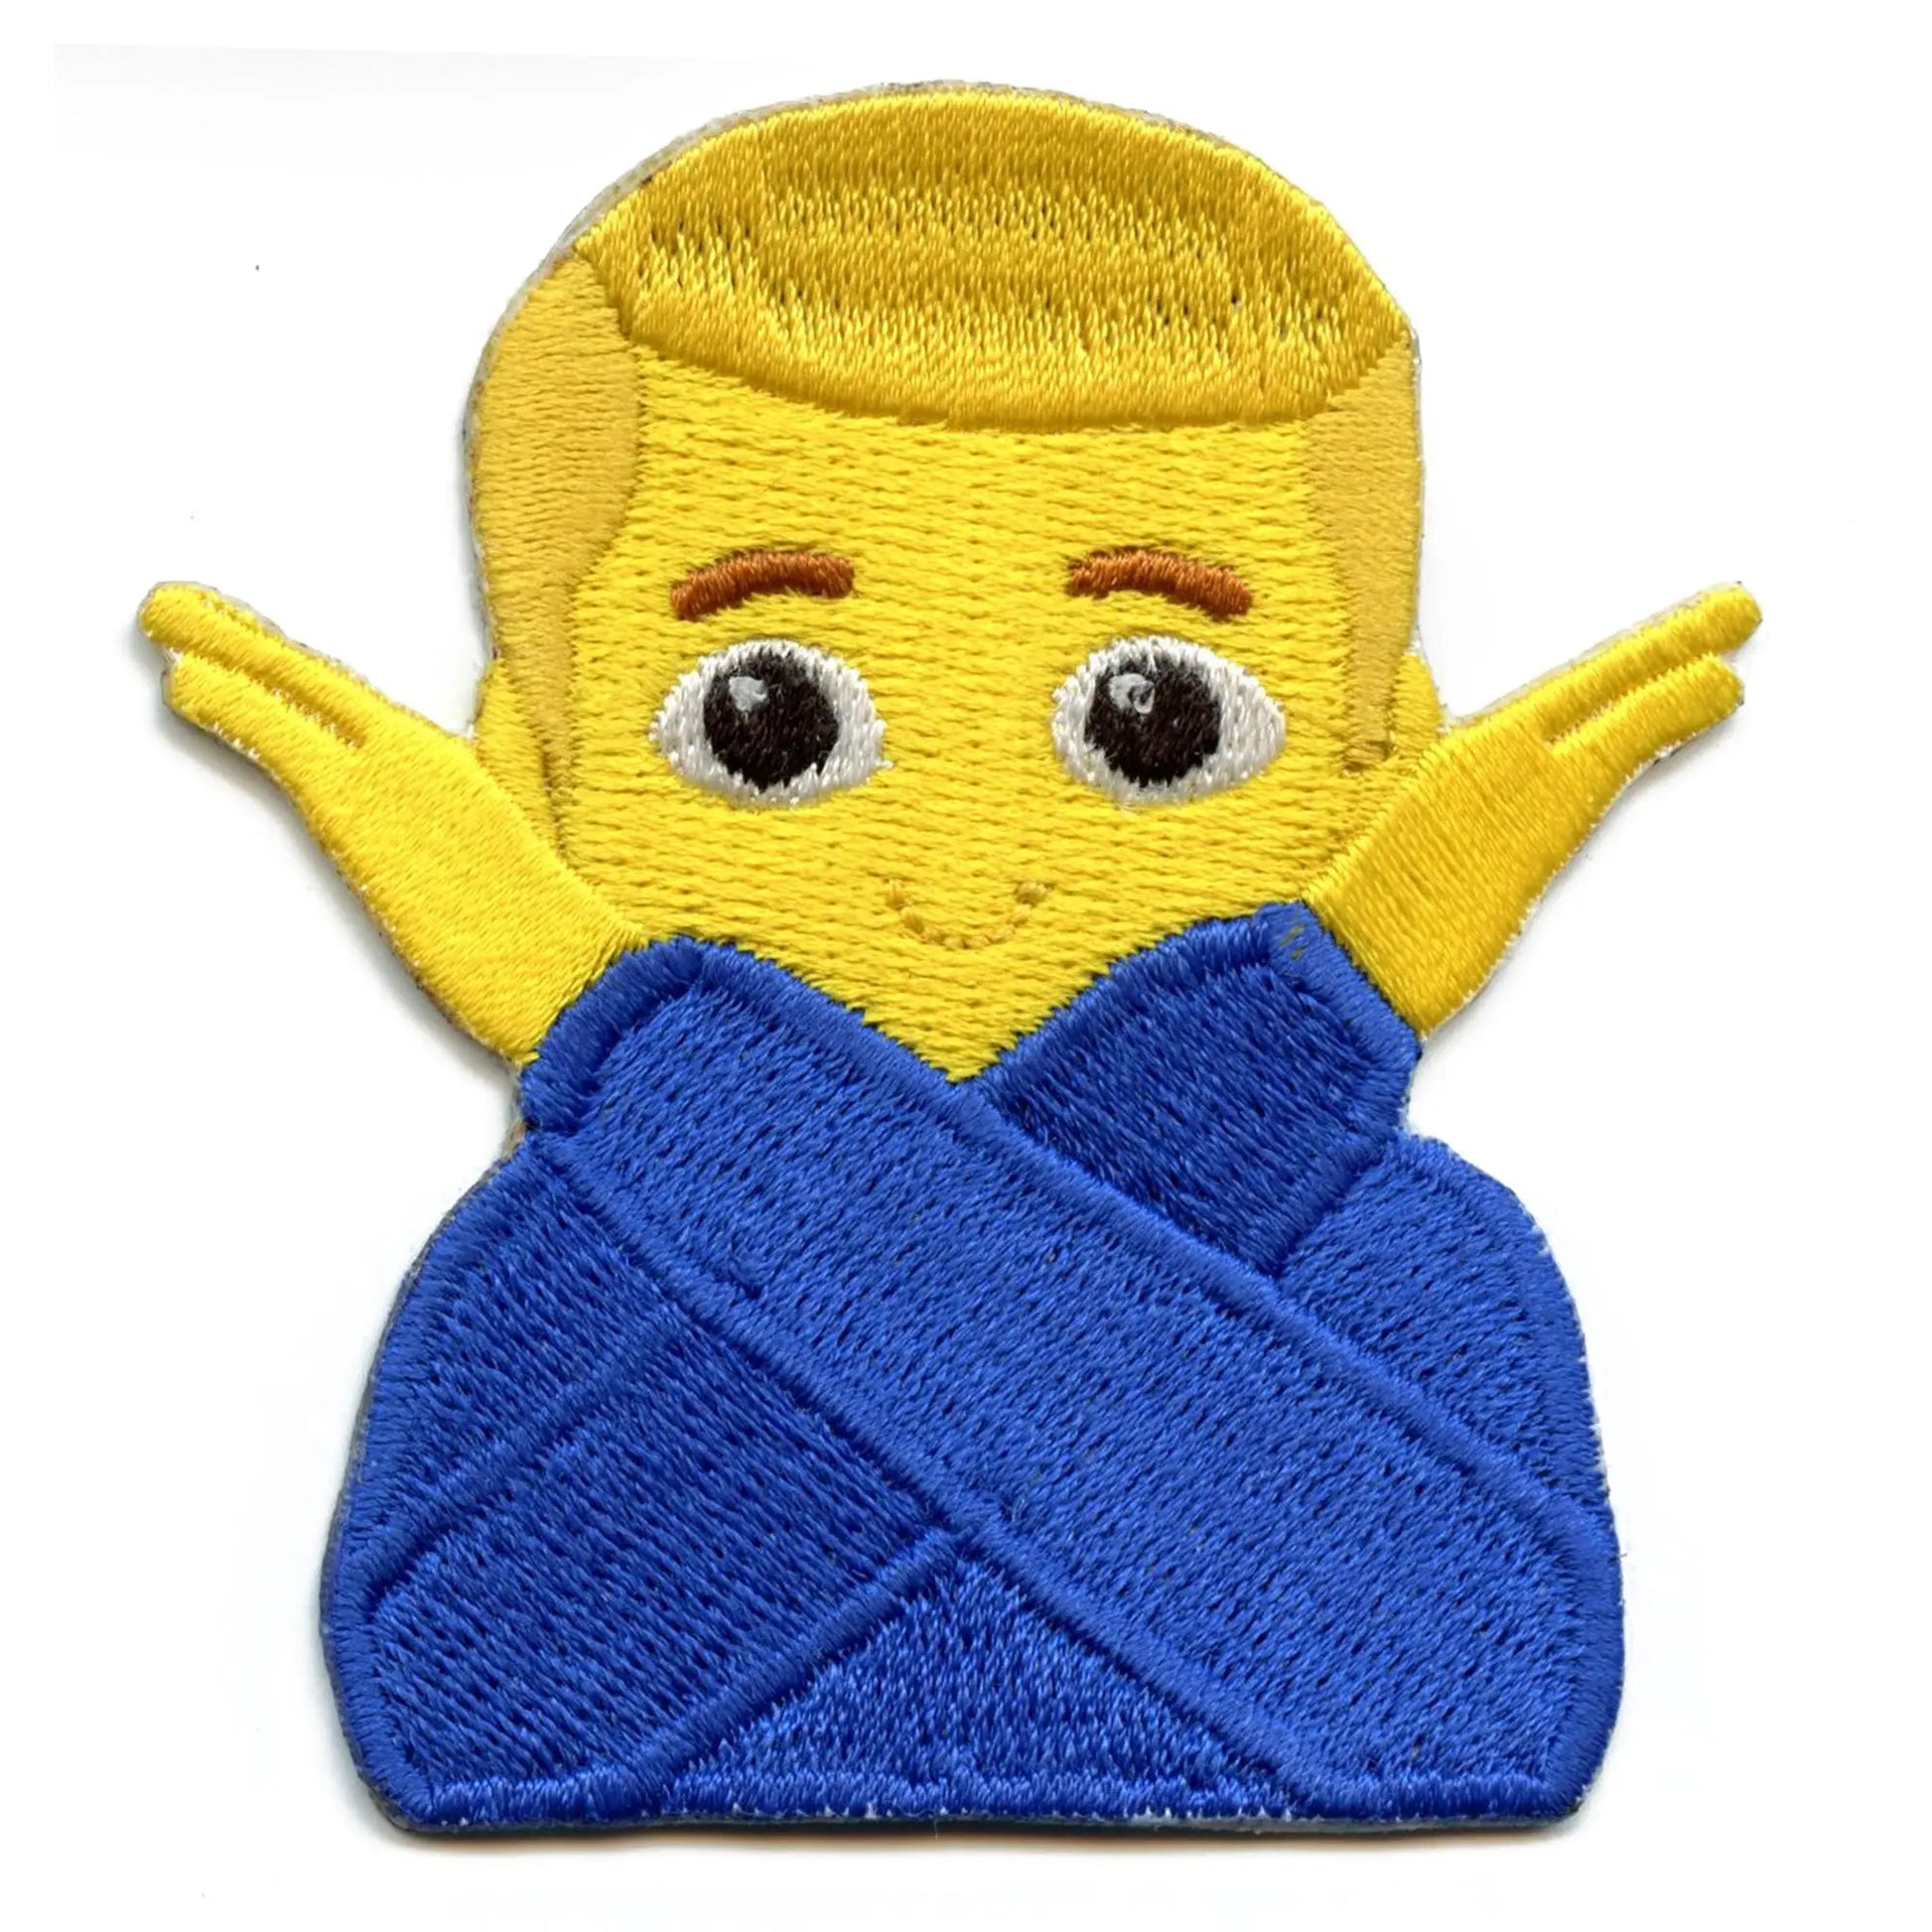 Crossed Arms Yellow Man Emoji Embroidered Iron On Patch 